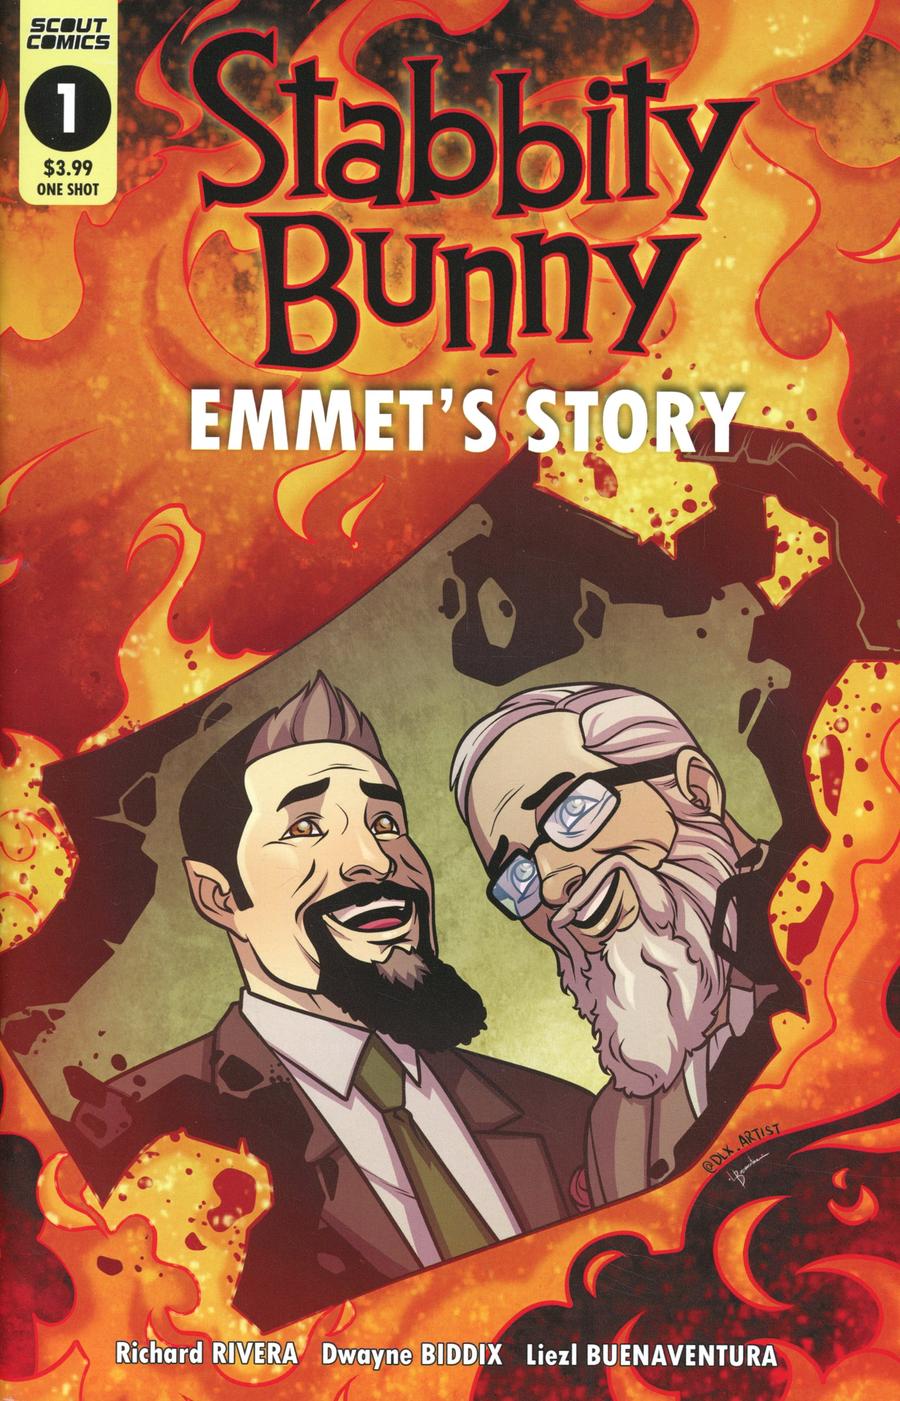 Stabbity Bunny Emmets Story #1 (One Shot) Cover A Regular Cover